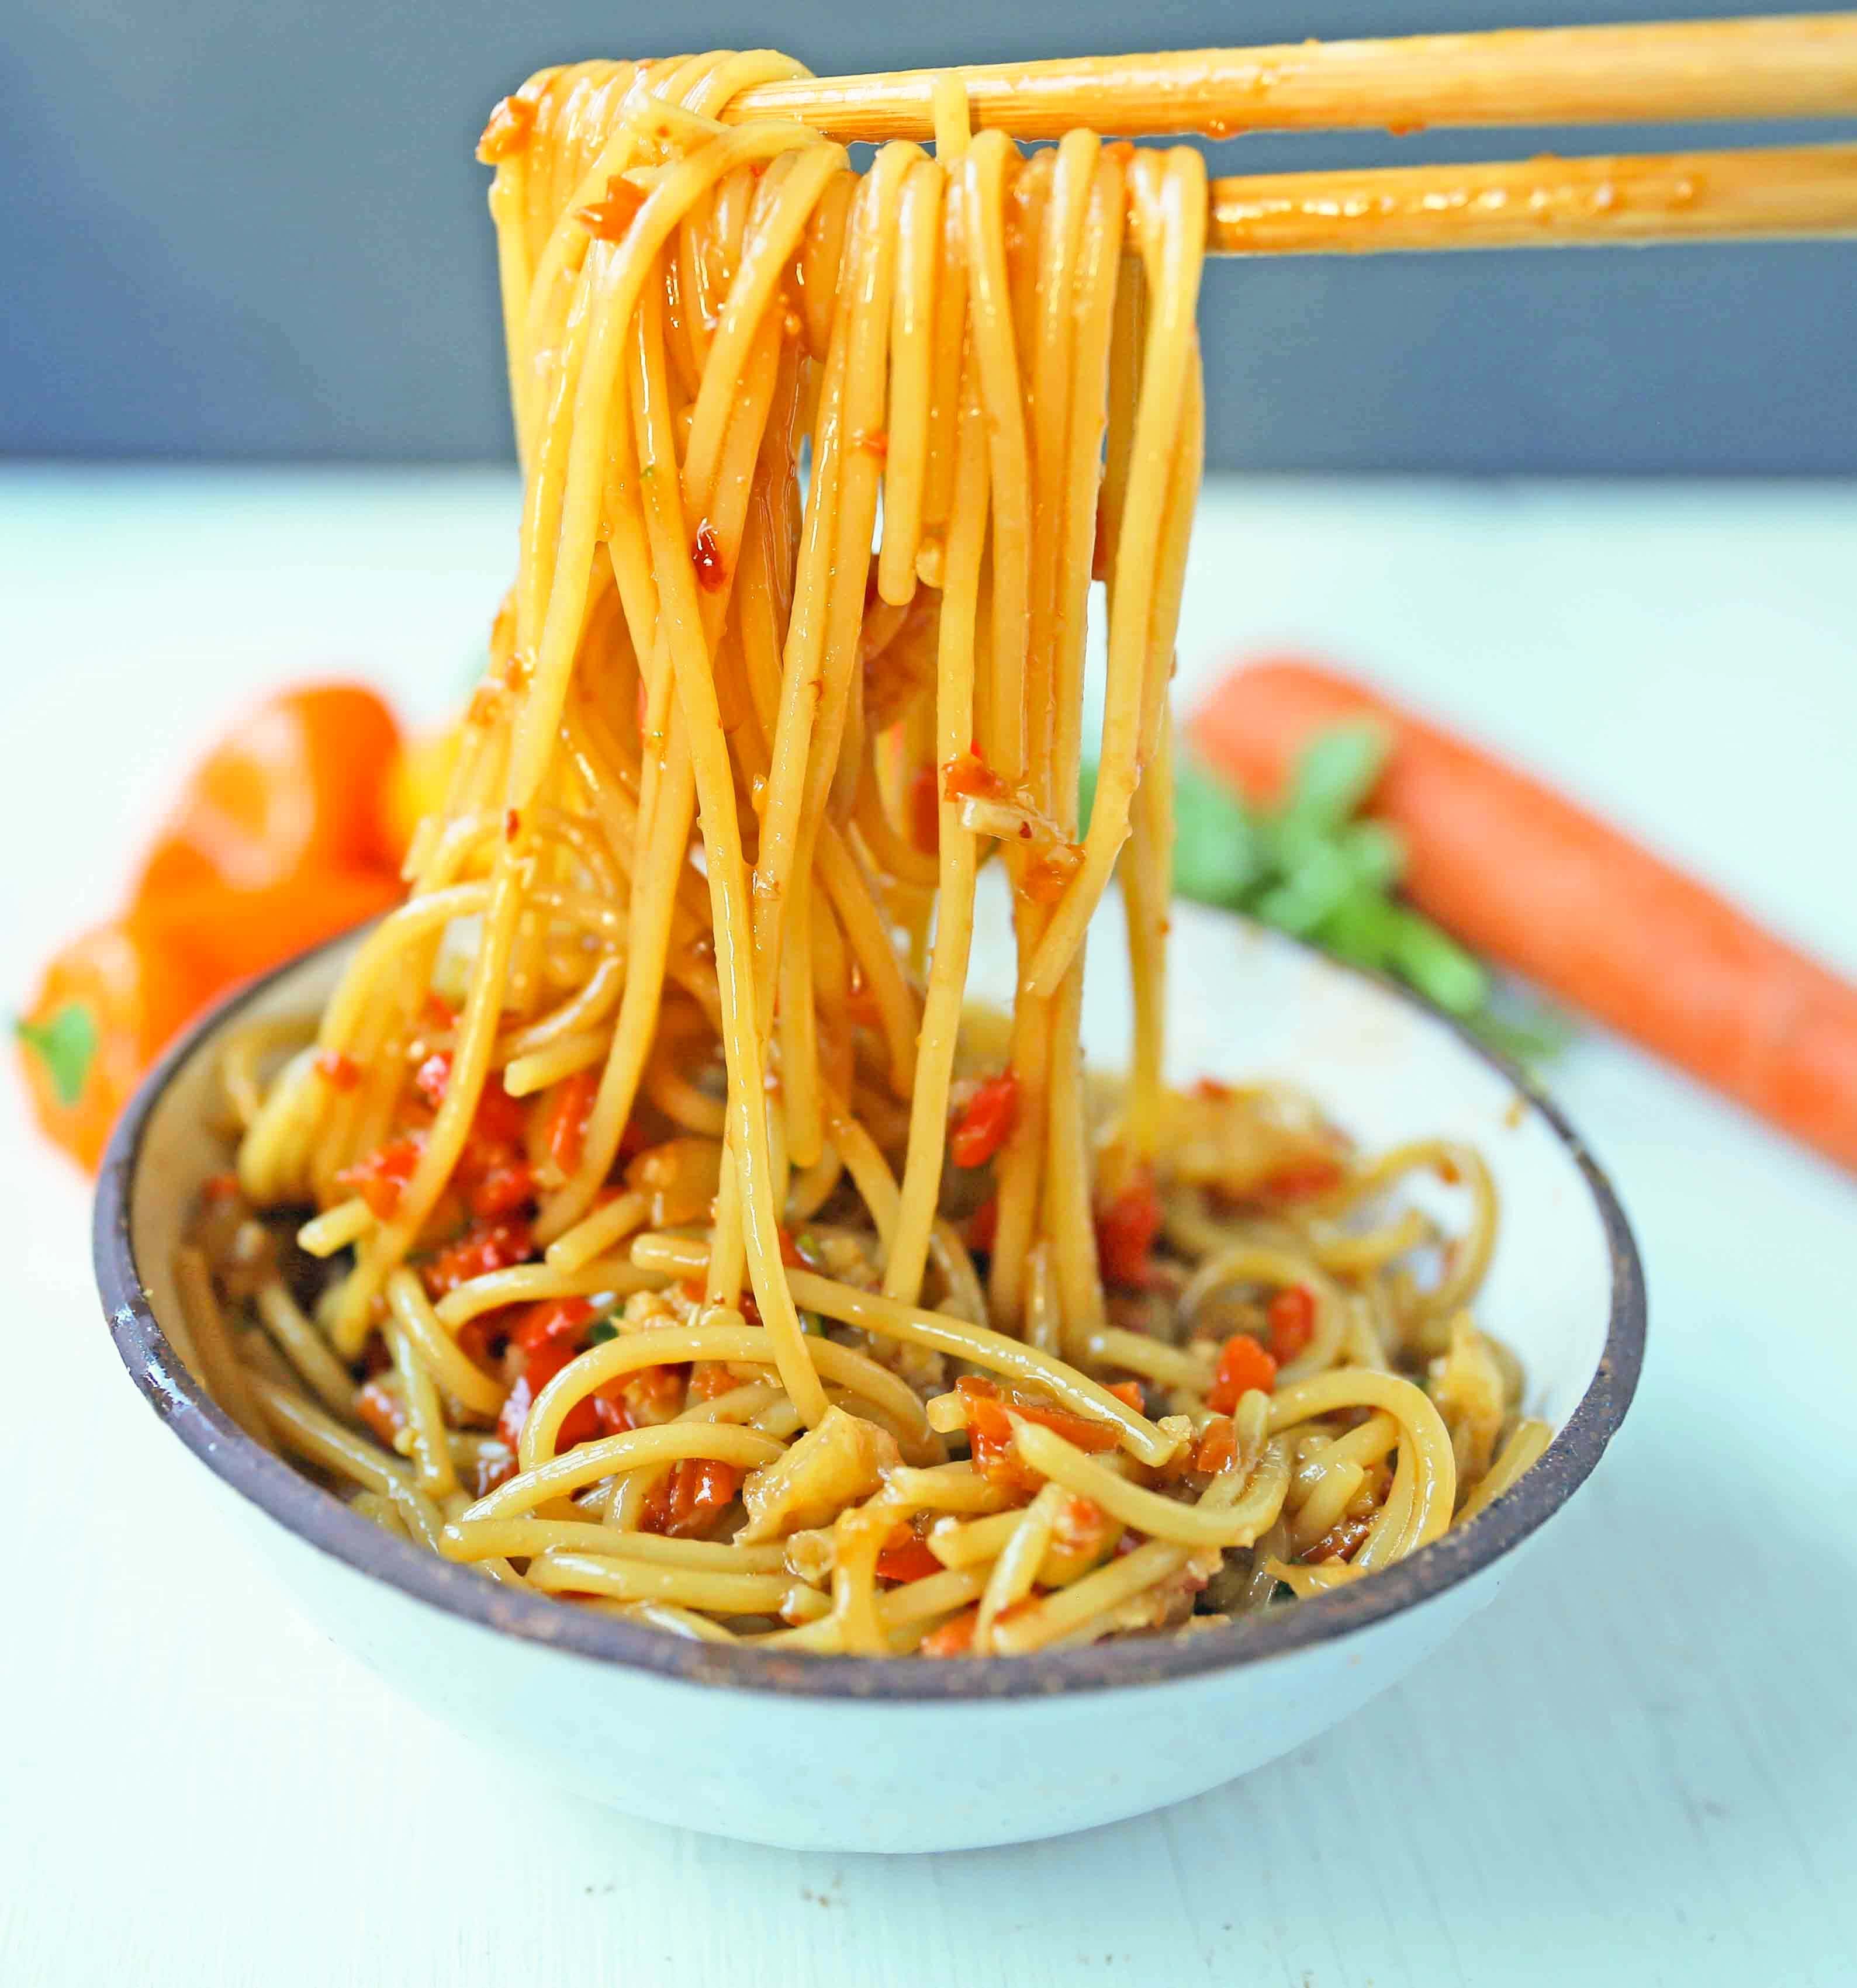 Asian Vegetable Stir-Fry Noodles. Healthy fresh vegetables in a homemade stir-fry sauce tossed with noodles. A quick and easy family dinner. 20-minute Asian Garlic Noodles Recipe. www.modernhoney.com #asiannoodles #garlicnoodles #stirfry #veggiestirfry #asianfood 